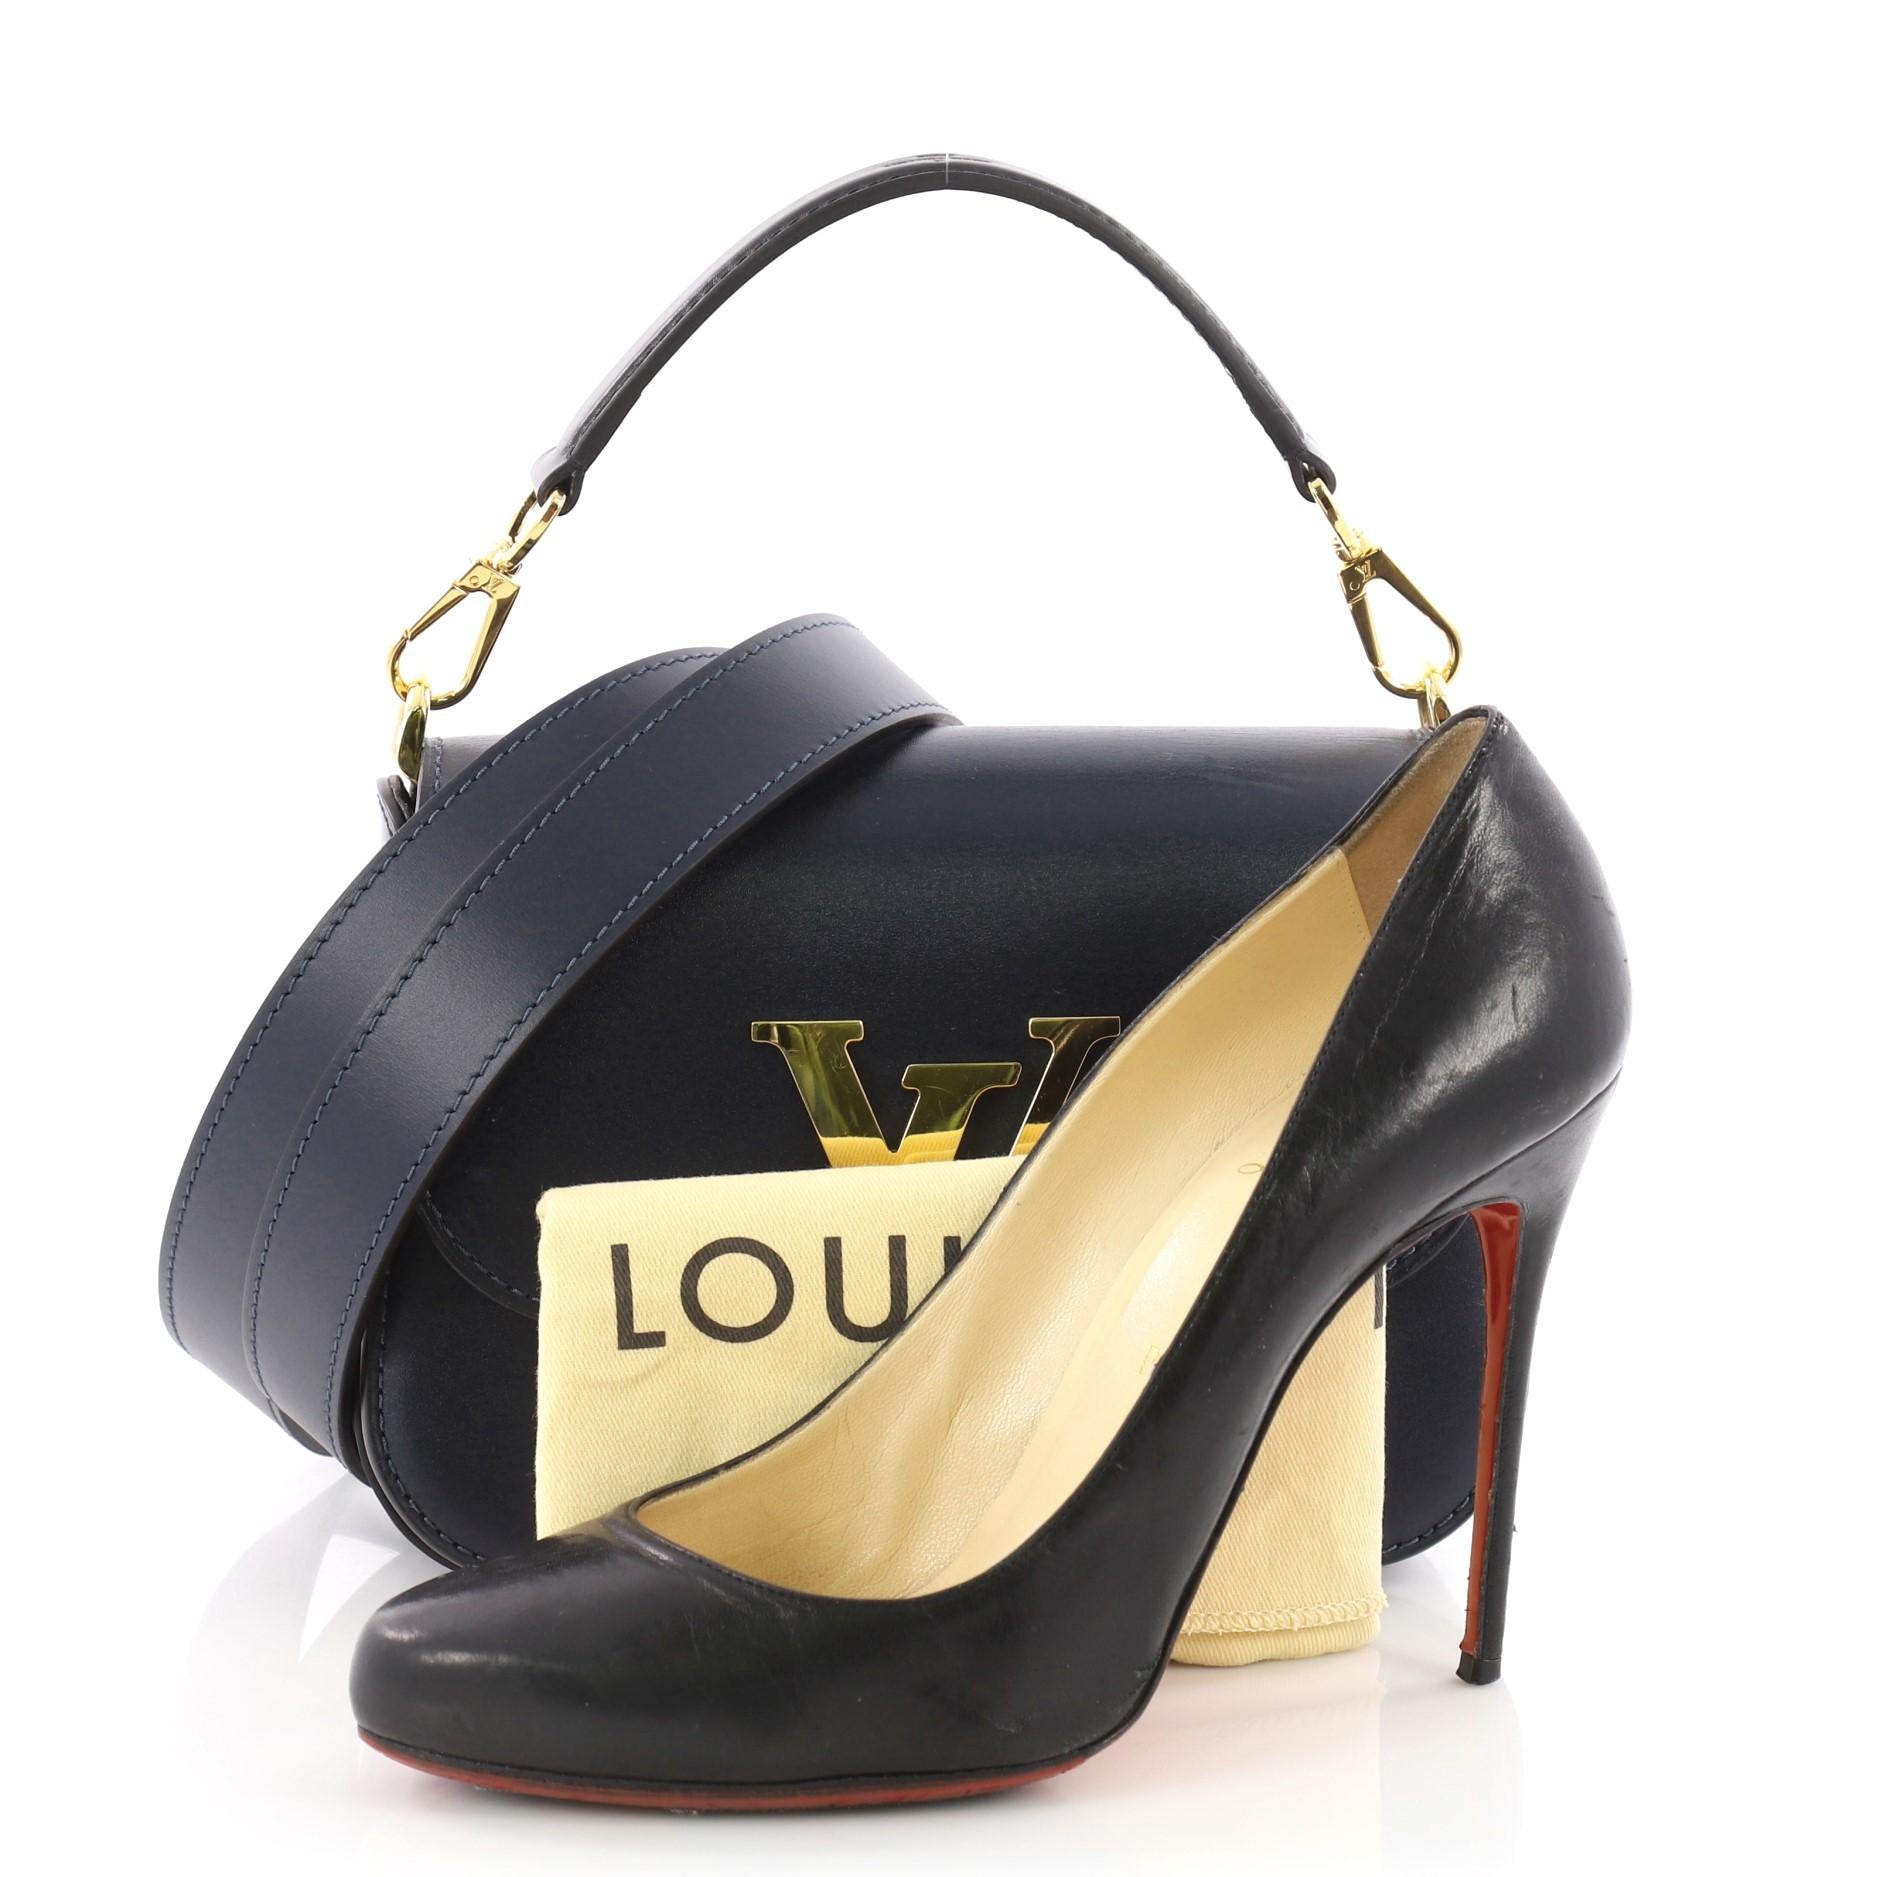 This Louis Vuitton Vivienne LV Bag Box Leather, crafted from navy blue and black leather,  features a leather top handle, frontal lock with prominent LV signature and gold-tone hardware accents. It opens to a black leather interior divided into two